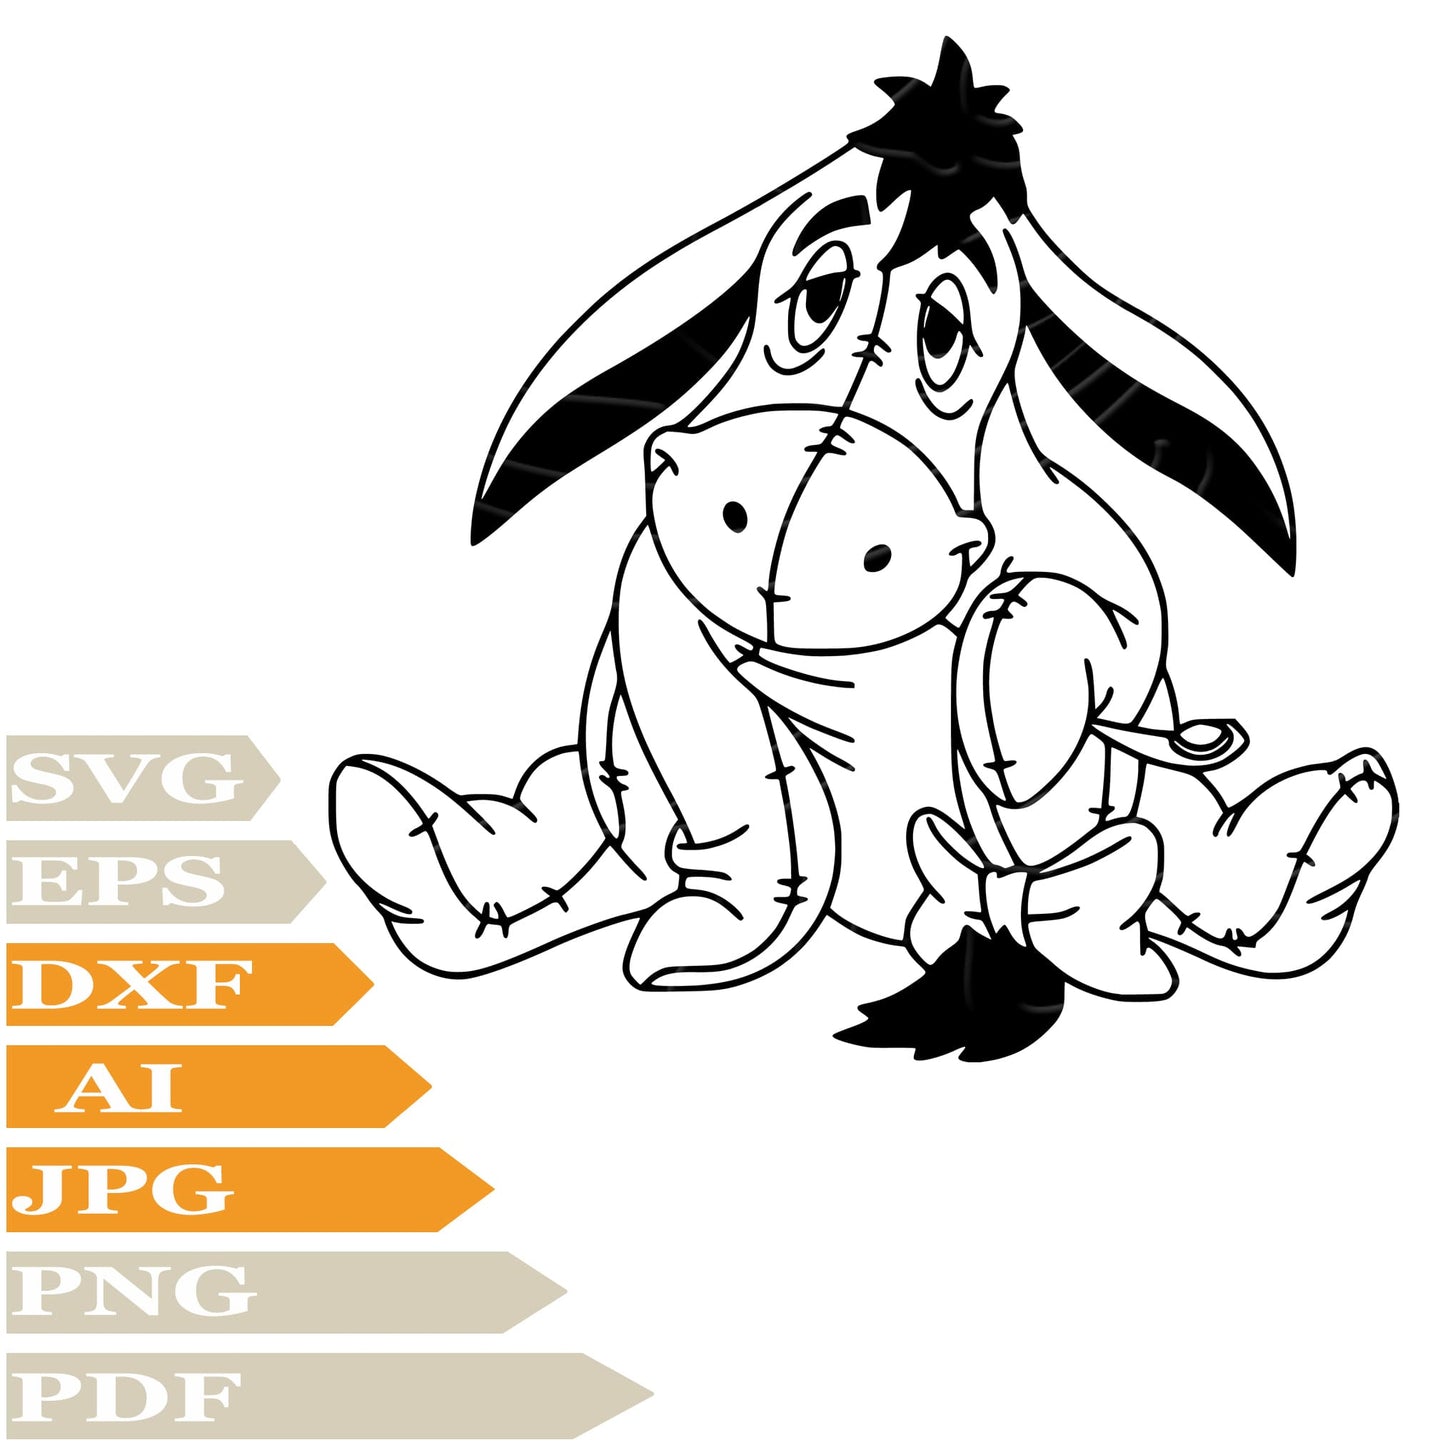 Winnie The Pooh﻿ SVG, Donkey SVG Design, Sad Donkey PNG, Donkey Vector Graphics, Winnie The Pooh Donkey For Cricut, Digital Instant Download, Clip Art, Cut File, For Shirts, Silhouette